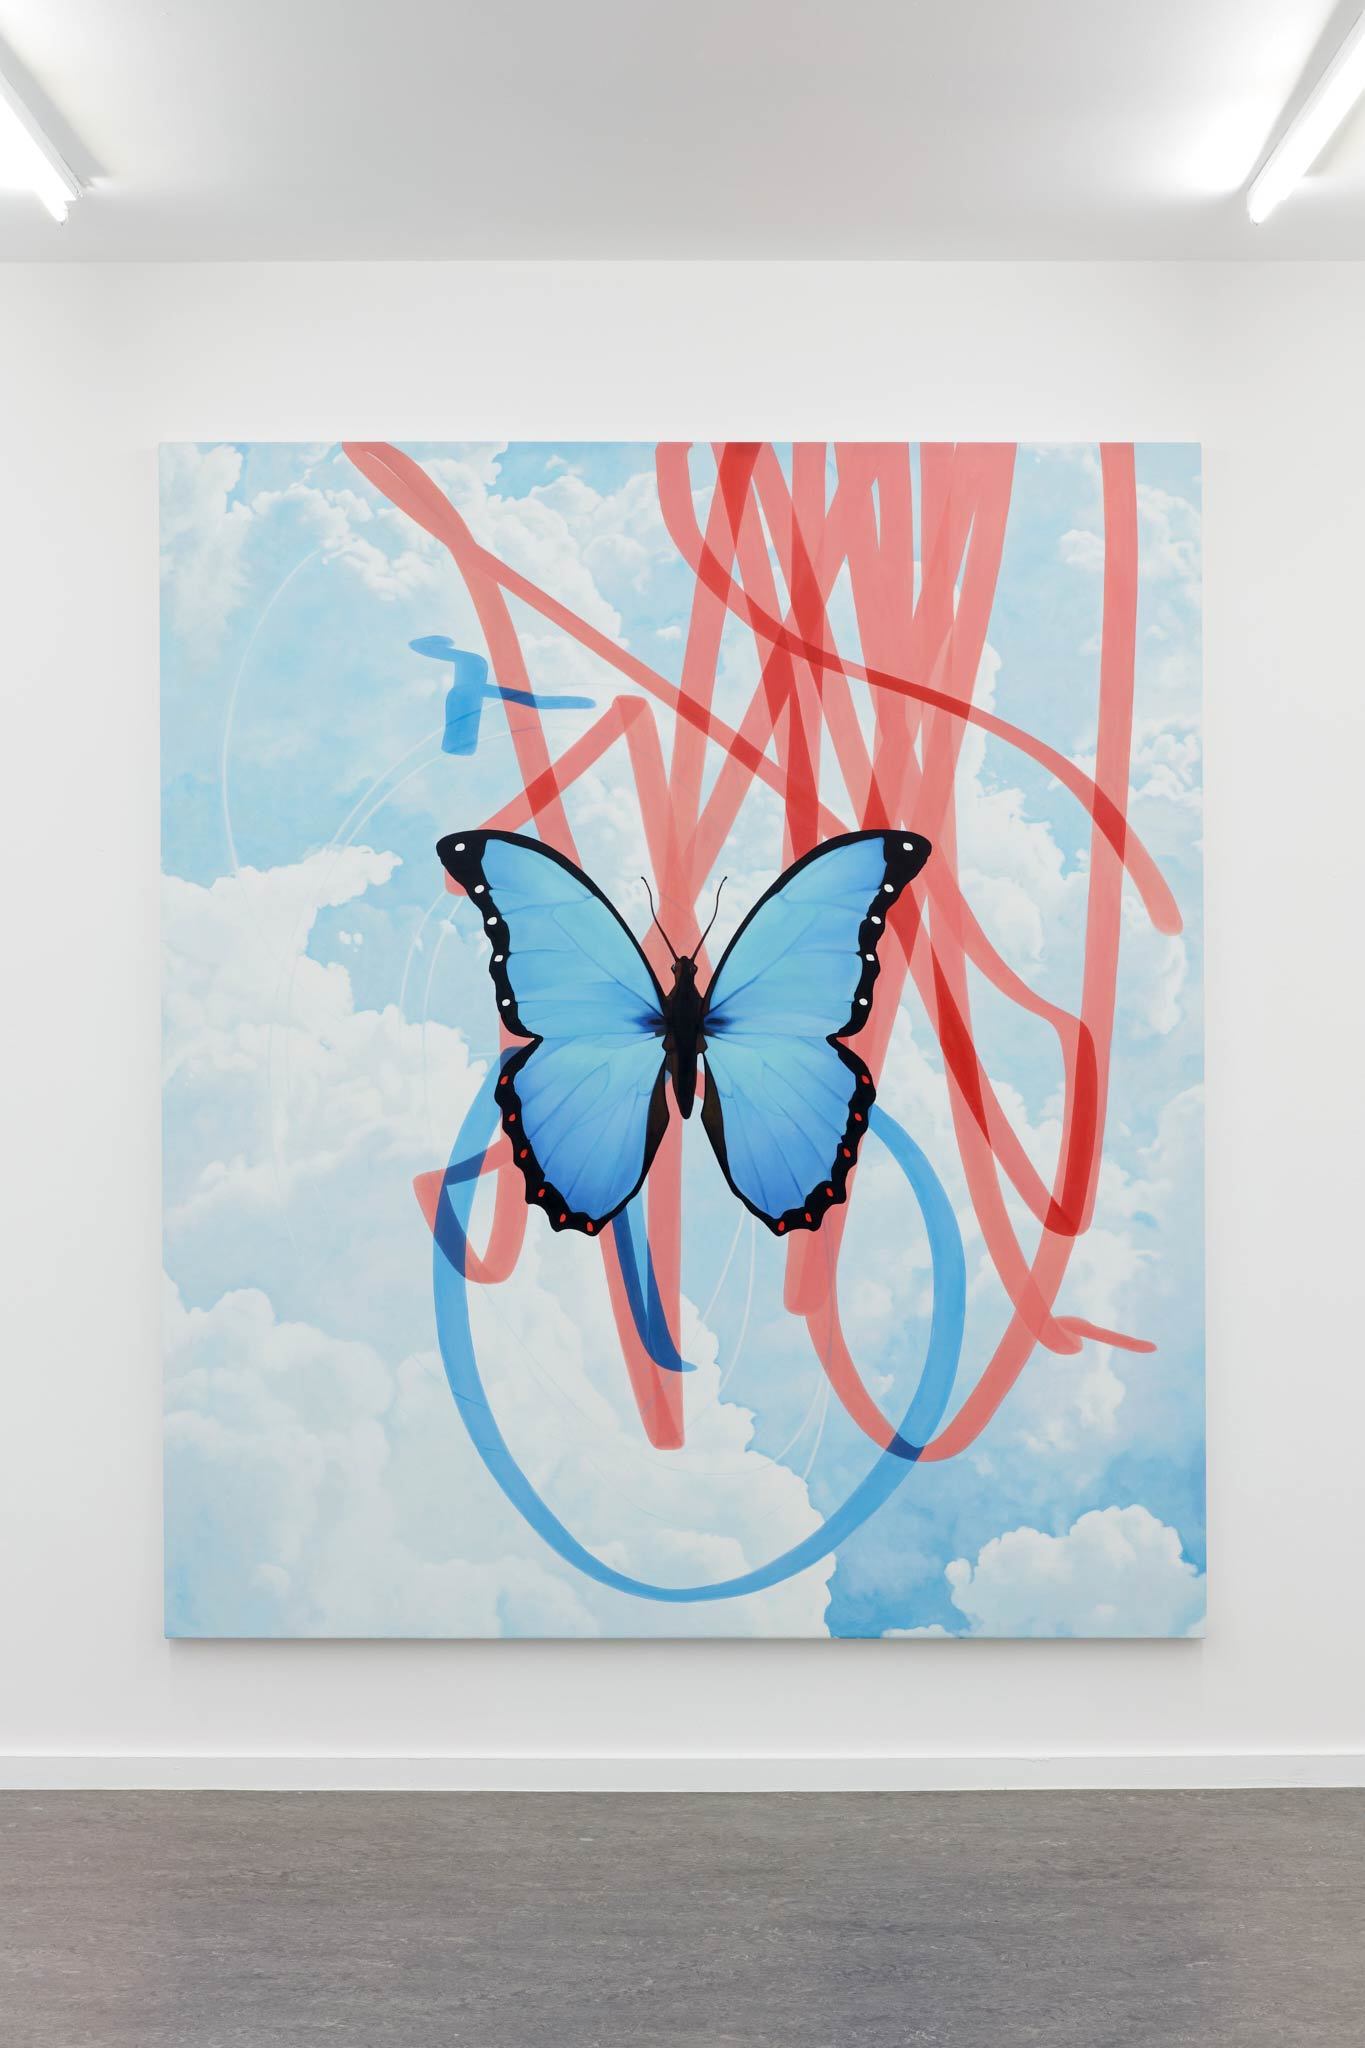 Painting by Chris Drange showing a  Butterfly, clouds and color stripes